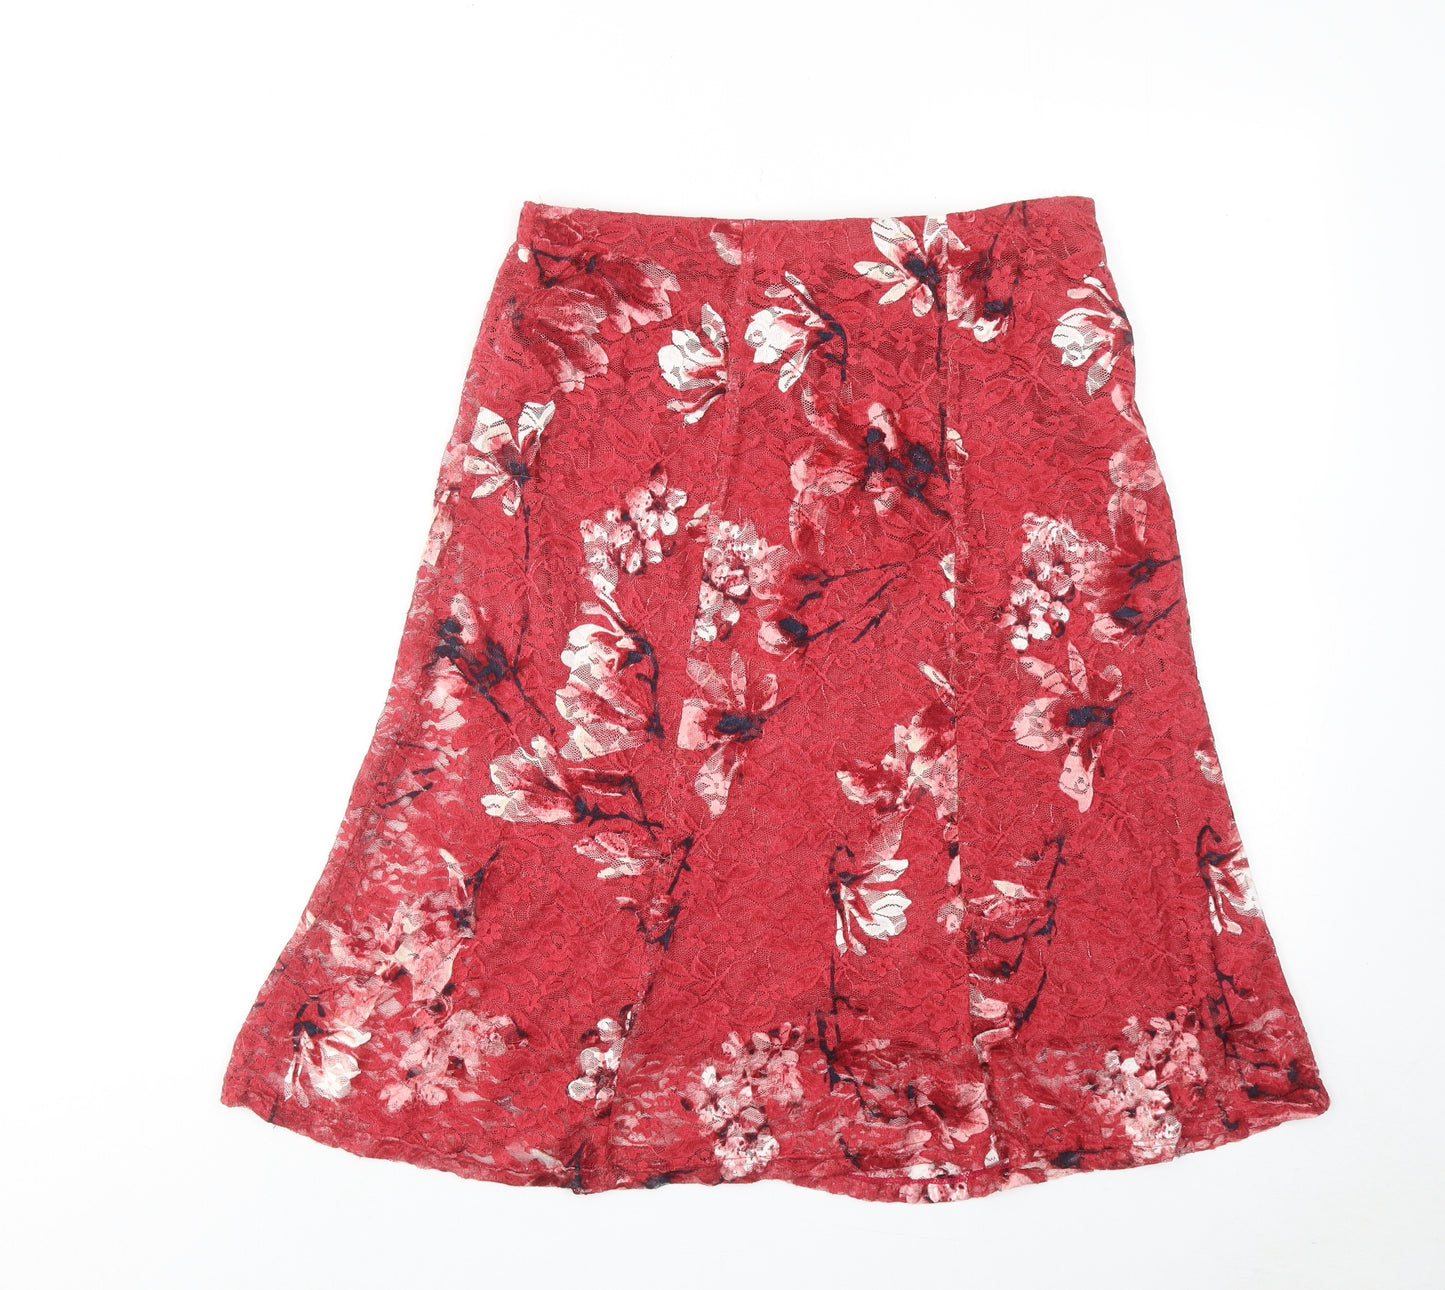 Bonmarché Womens Pink Floral Polyester Swing Skirt Size 12